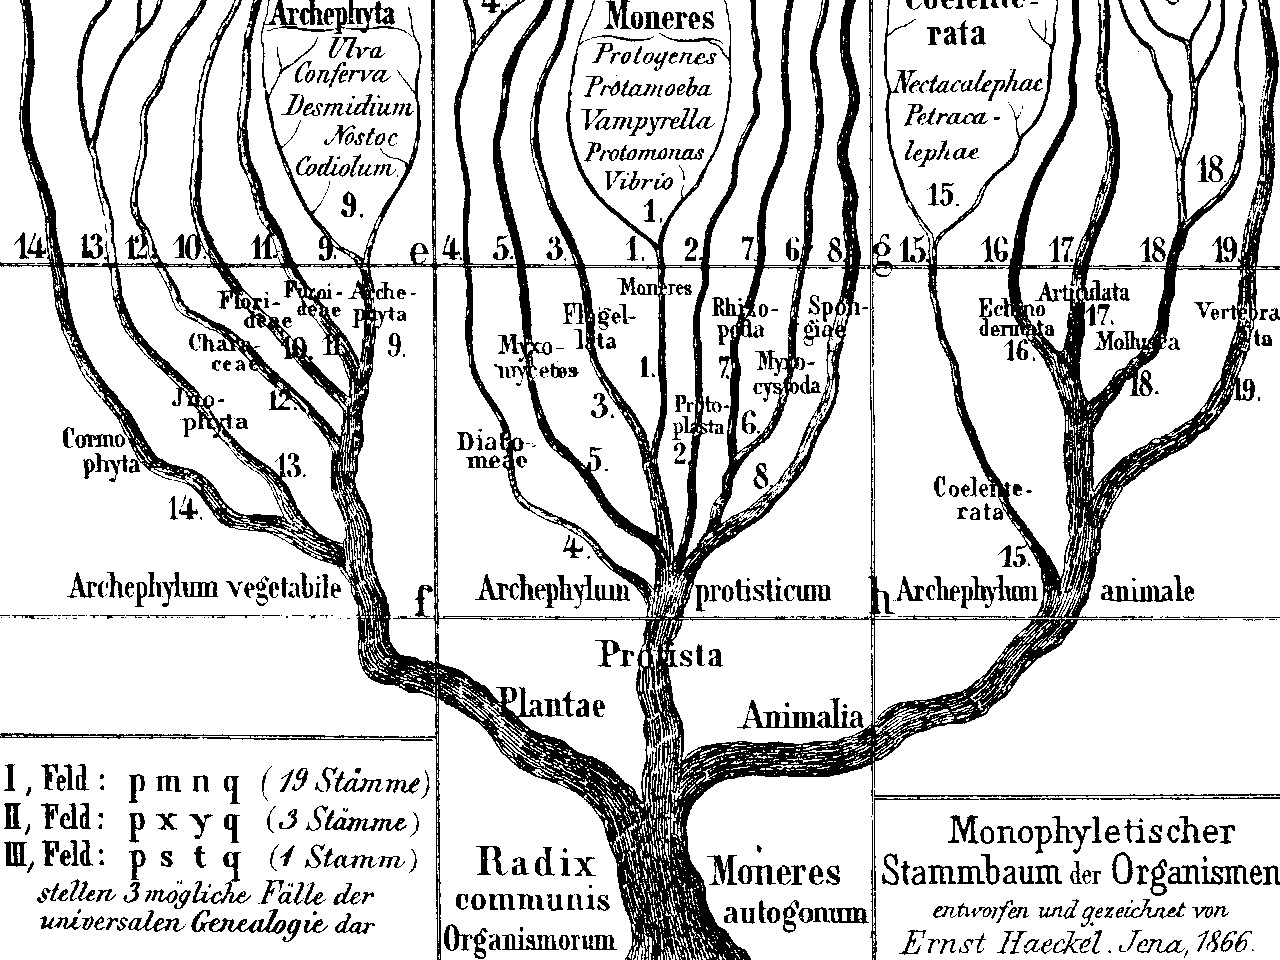 Fragment of a scan of the Tree of Life diagram.